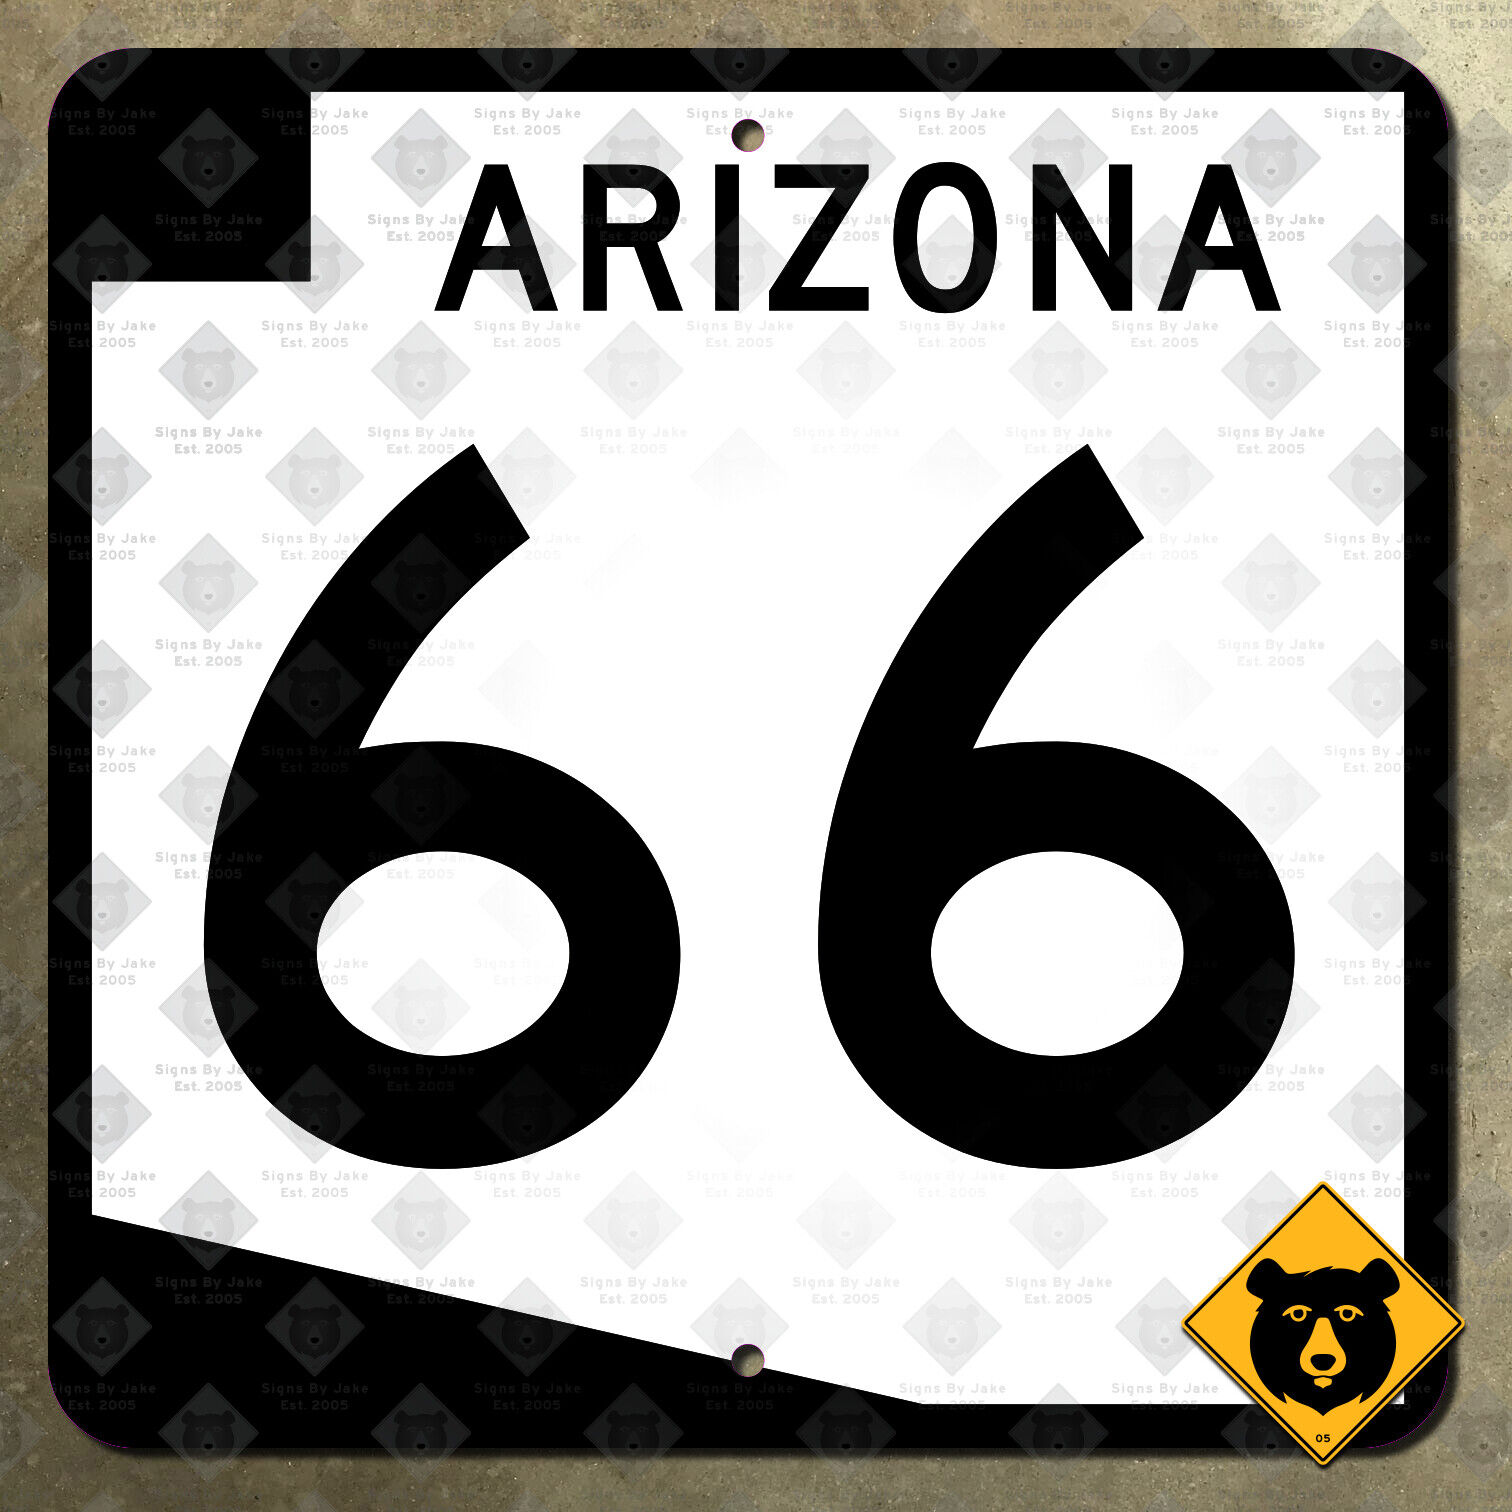 Arizona State Route 66 highway marker road sign 12x12 Kingman Peach Springs